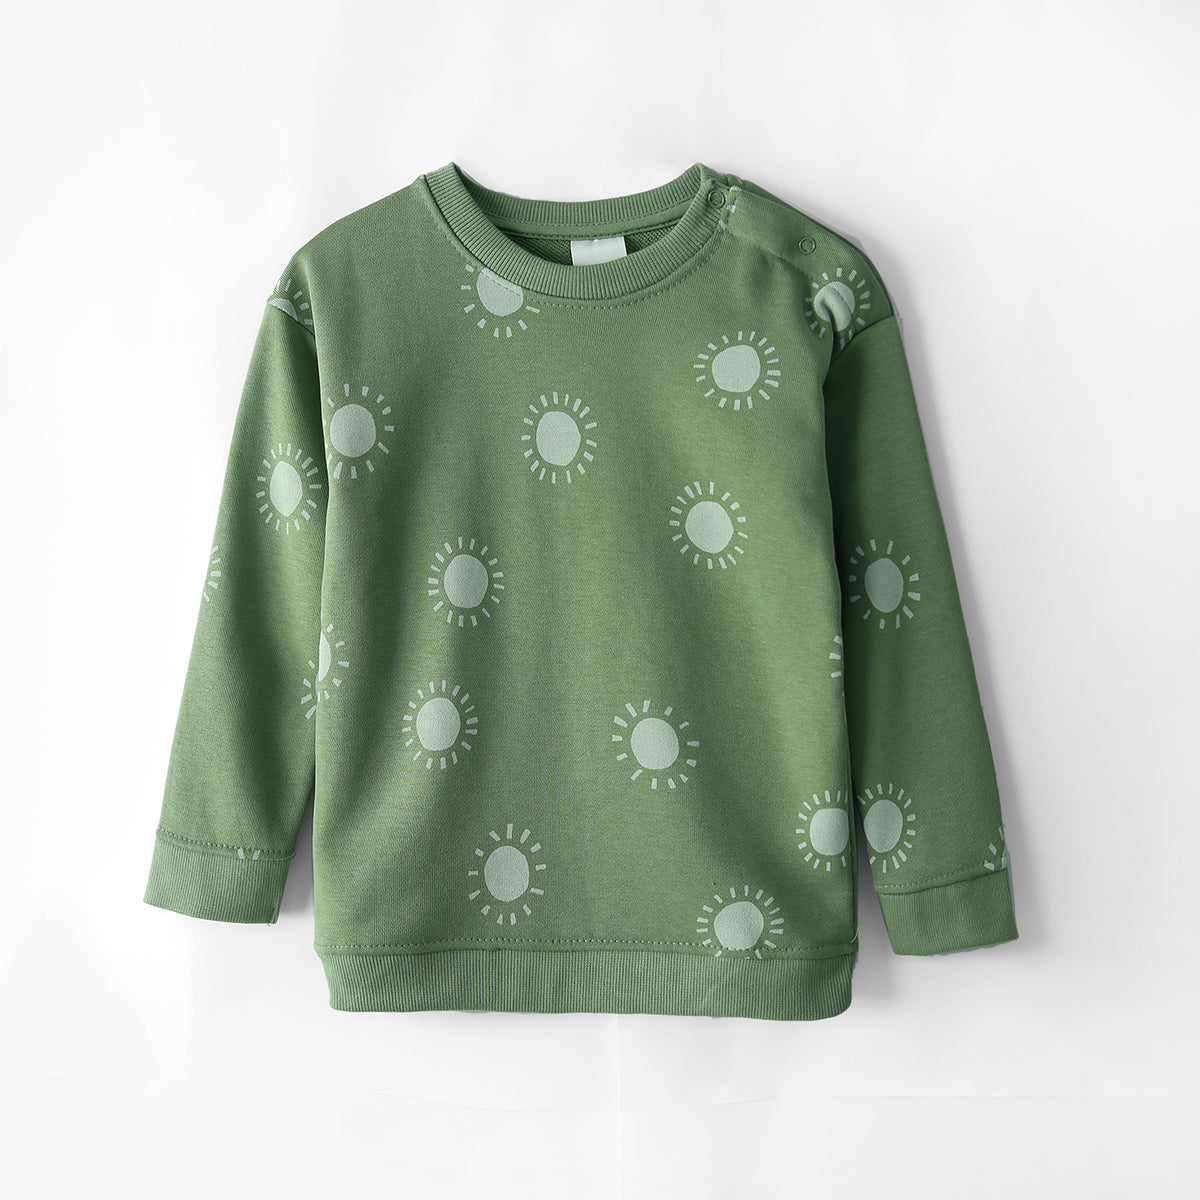 Premium Quality All-Over Printed Sweatshirt For Kids